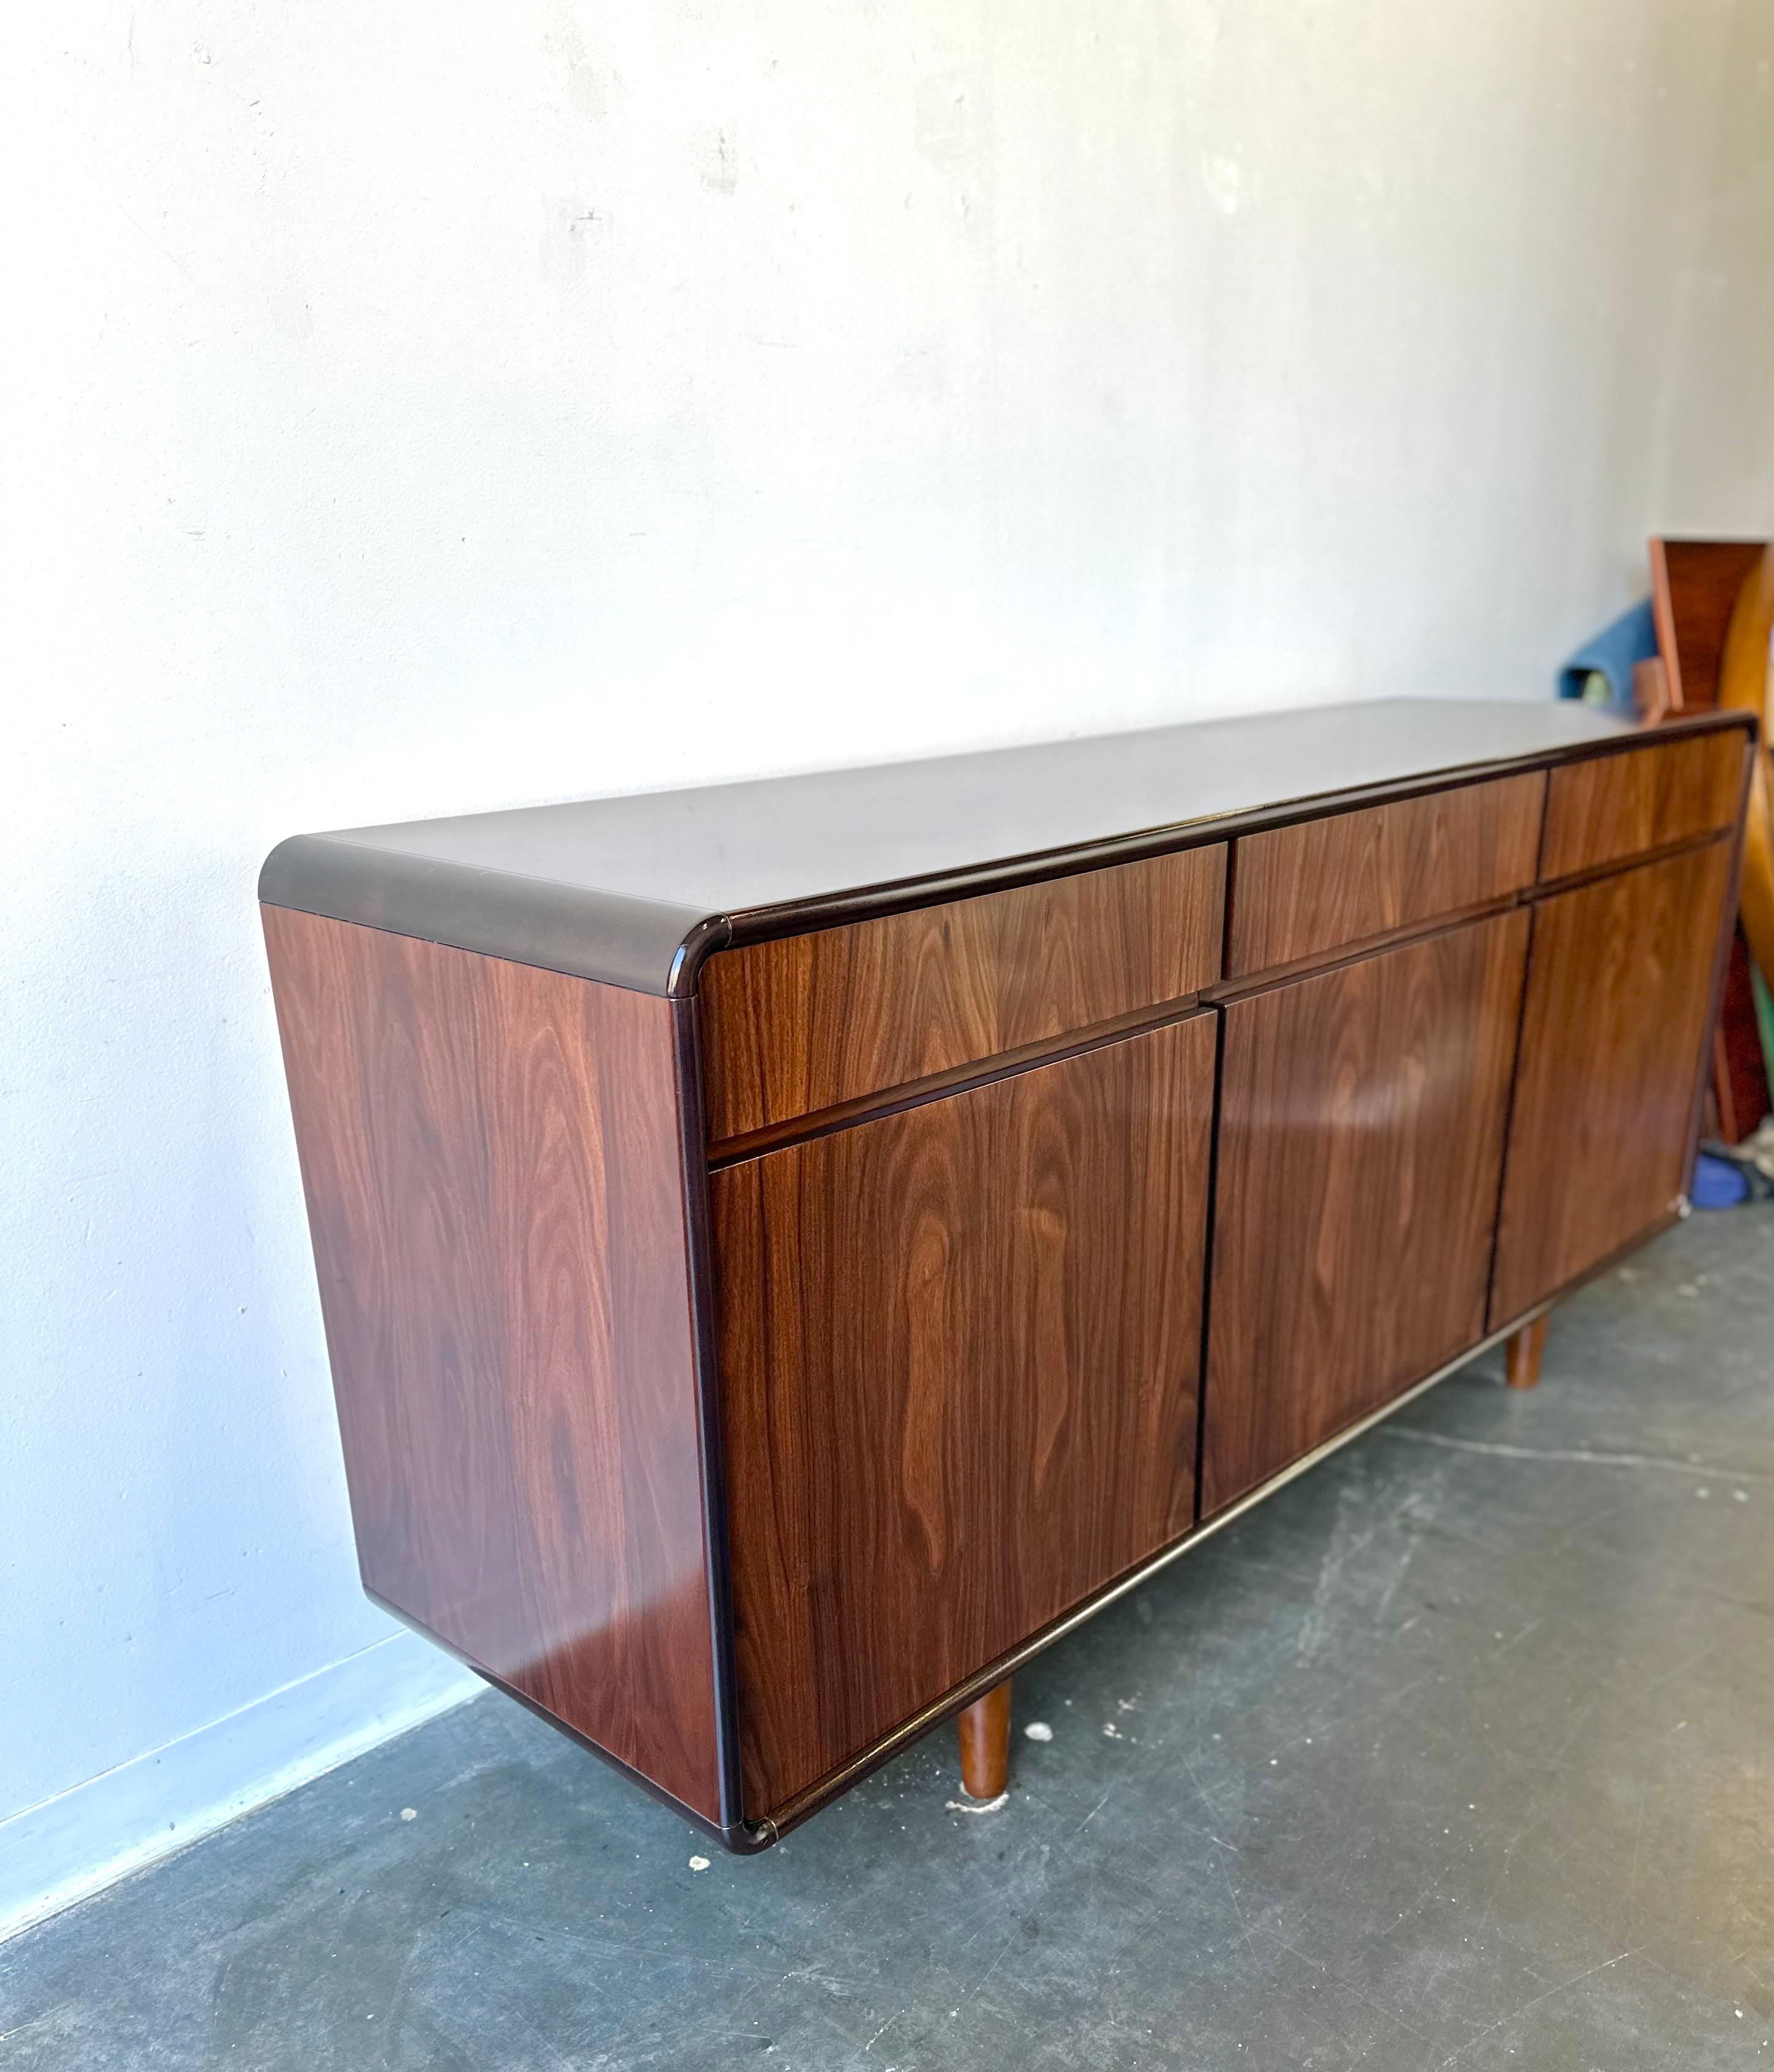 Rosewood vintage mcm credenza 

Gorgeous waterfall round edges , this piece is in excellent condition with minimal signs of wear.   Offering loads of storage and beautiful wood grain.

Dimensions:
71” W x 19 1/2” D x 34” H